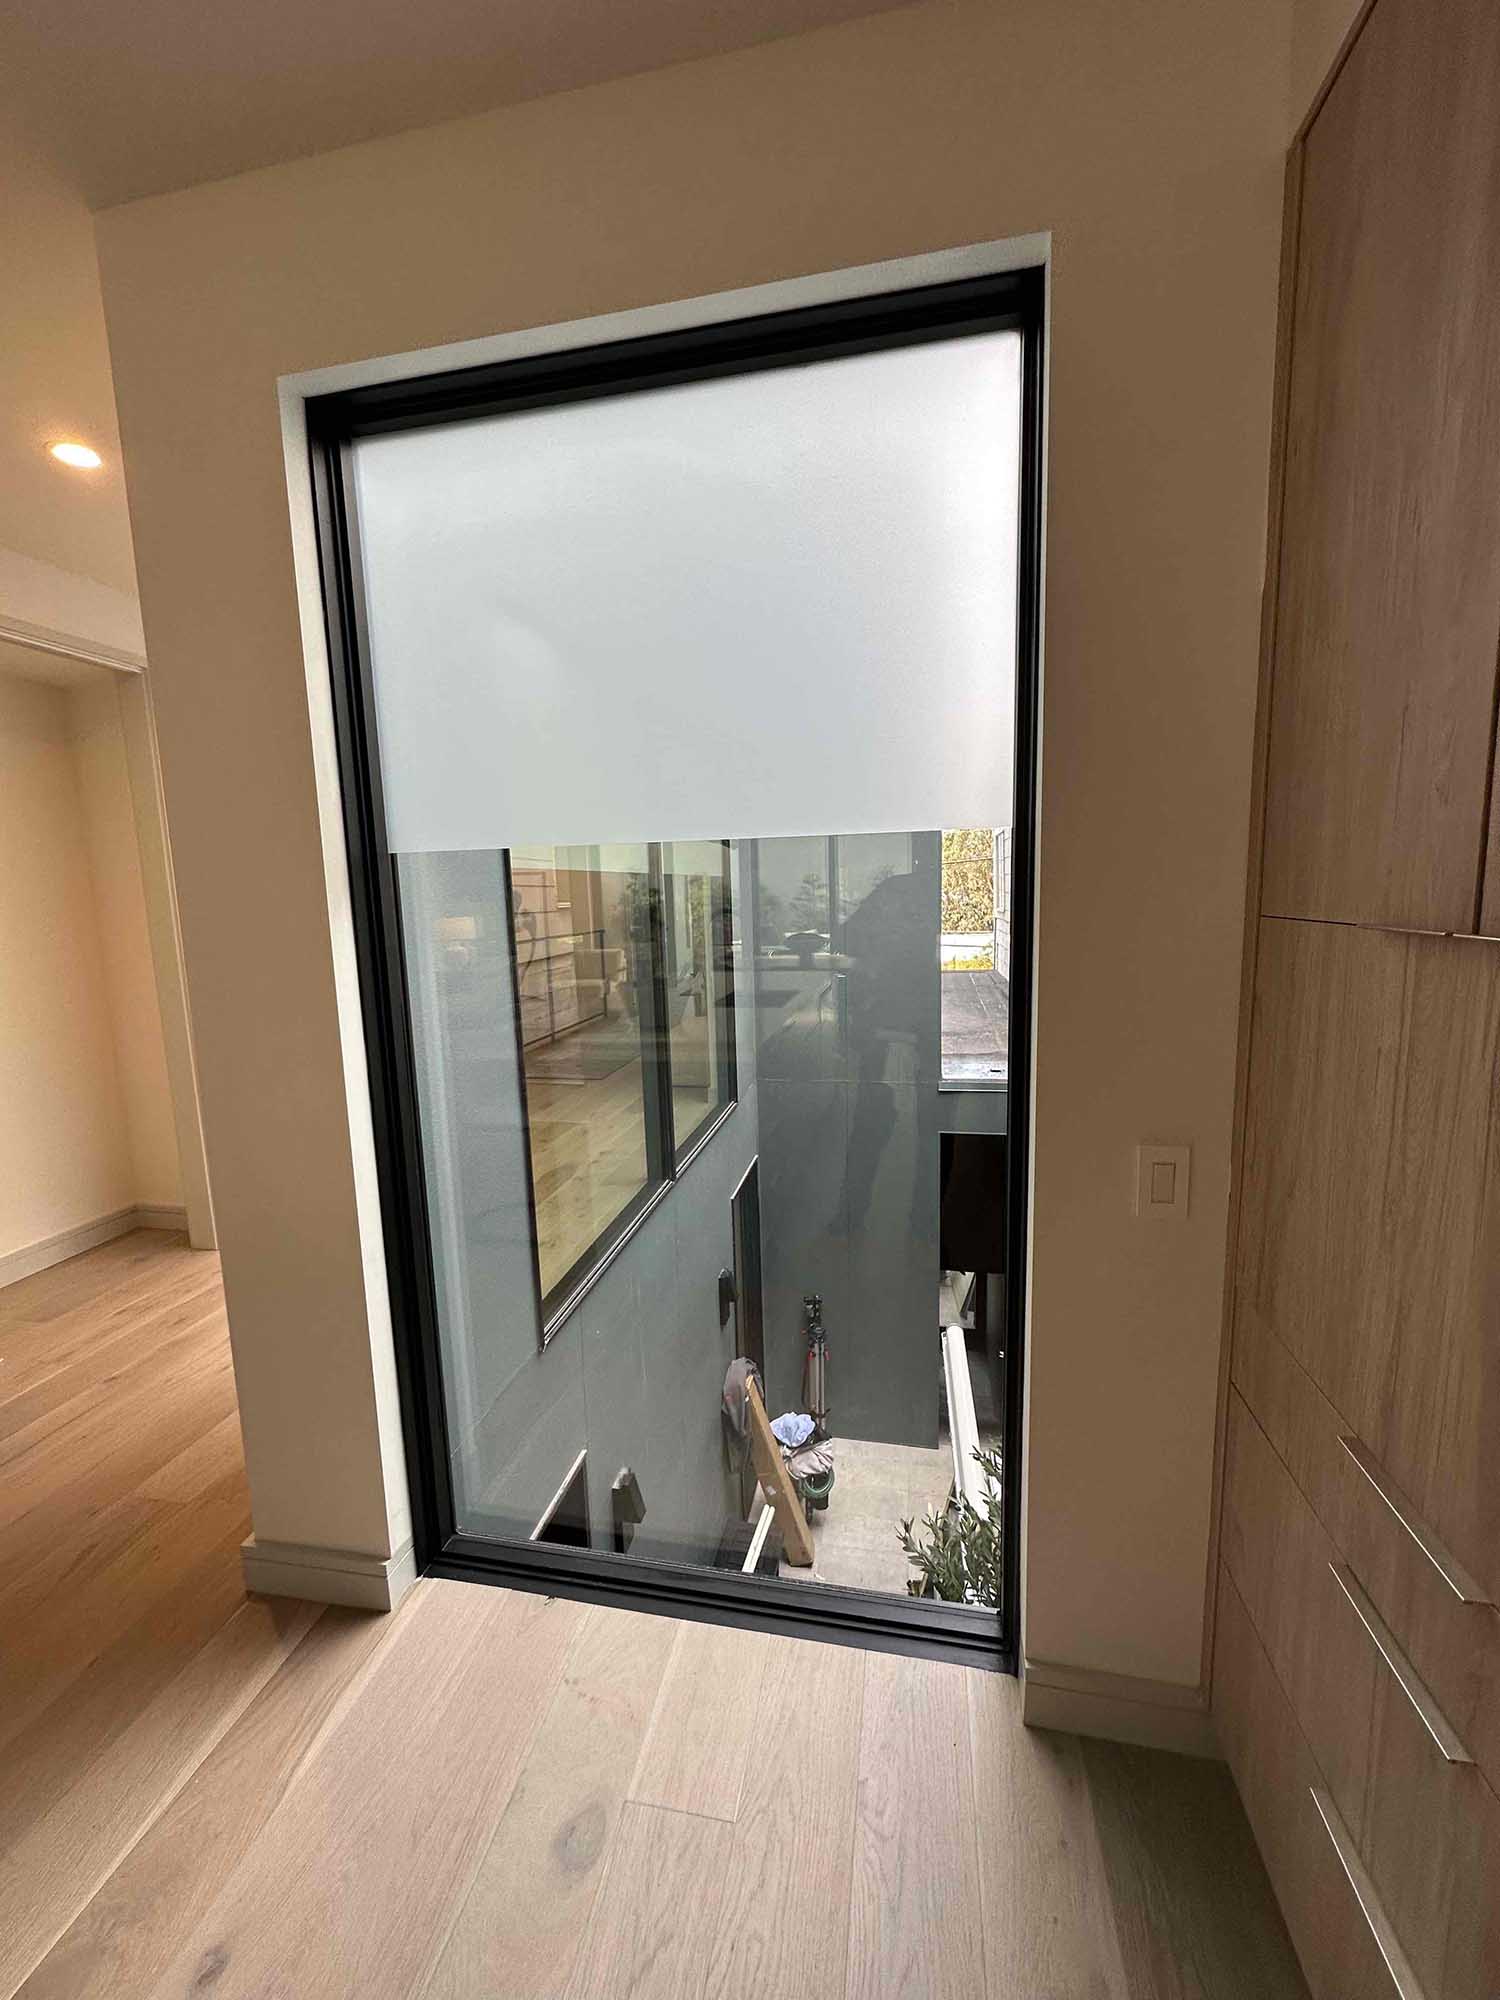 ClimatePro Installs 3M Privacy Window Film for San Francisco Homes